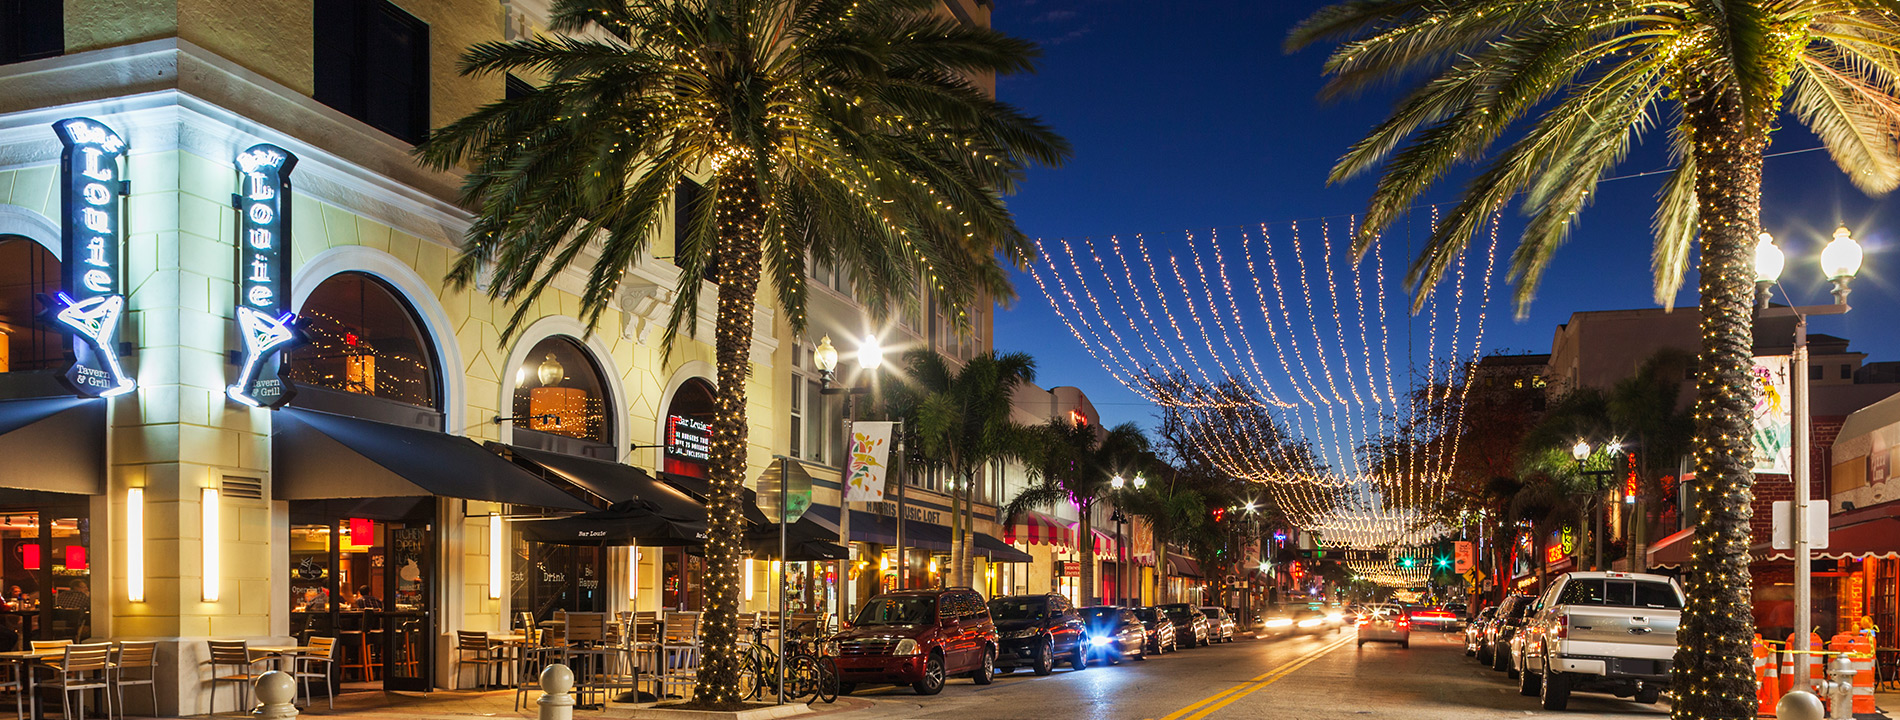 A street in West Palm Beach at night.